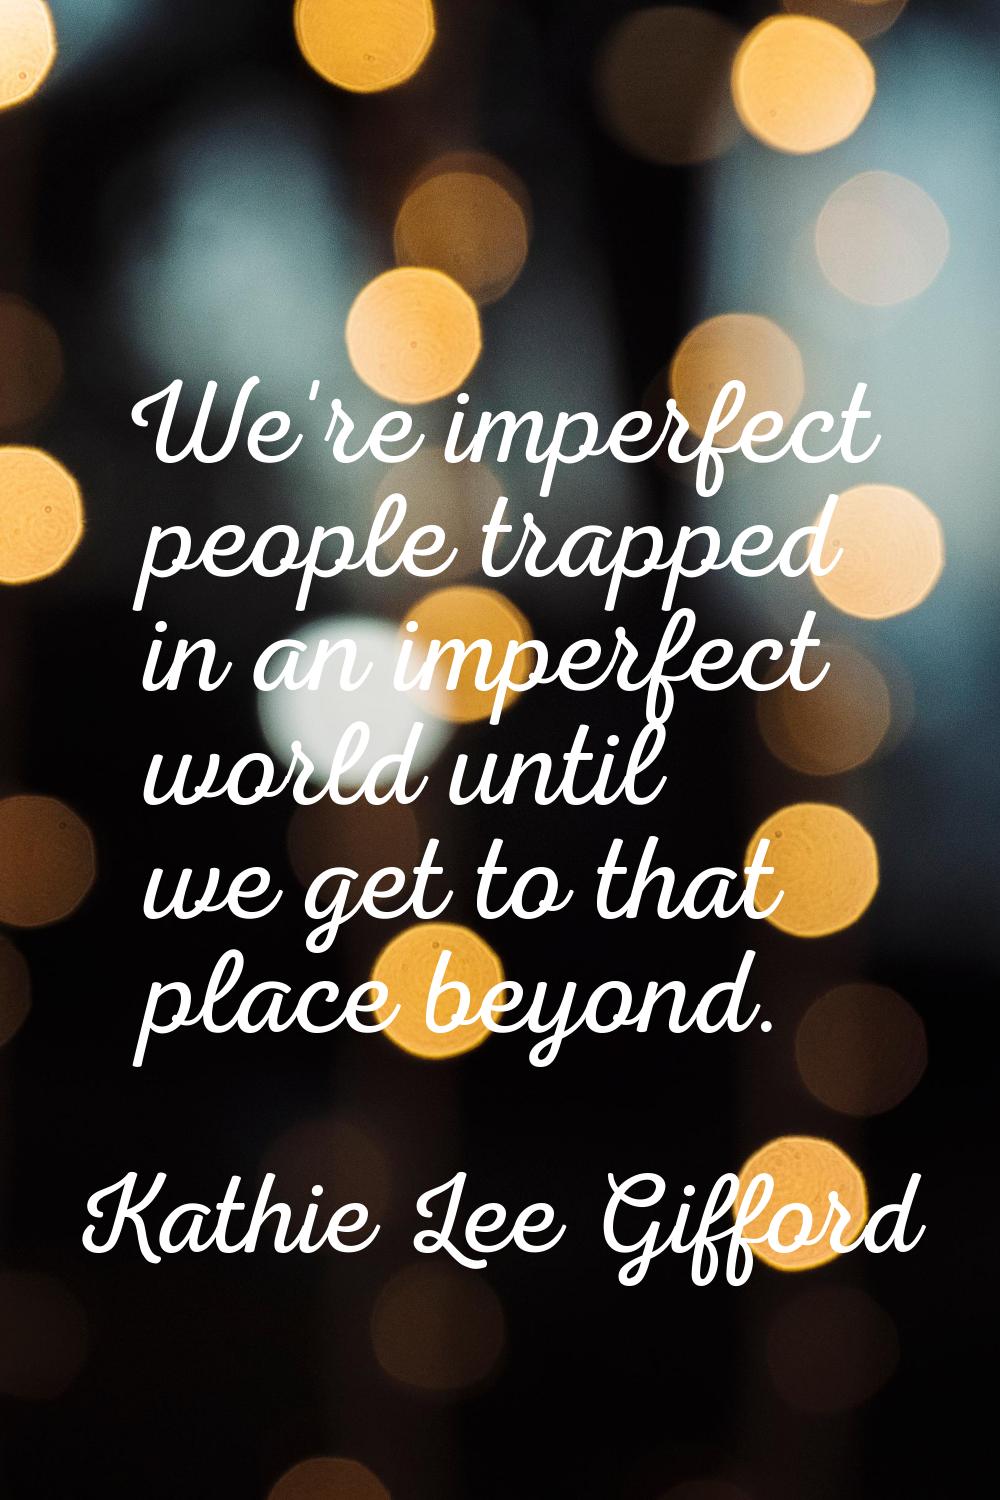 We're imperfect people trapped in an imperfect world until we get to that place beyond.